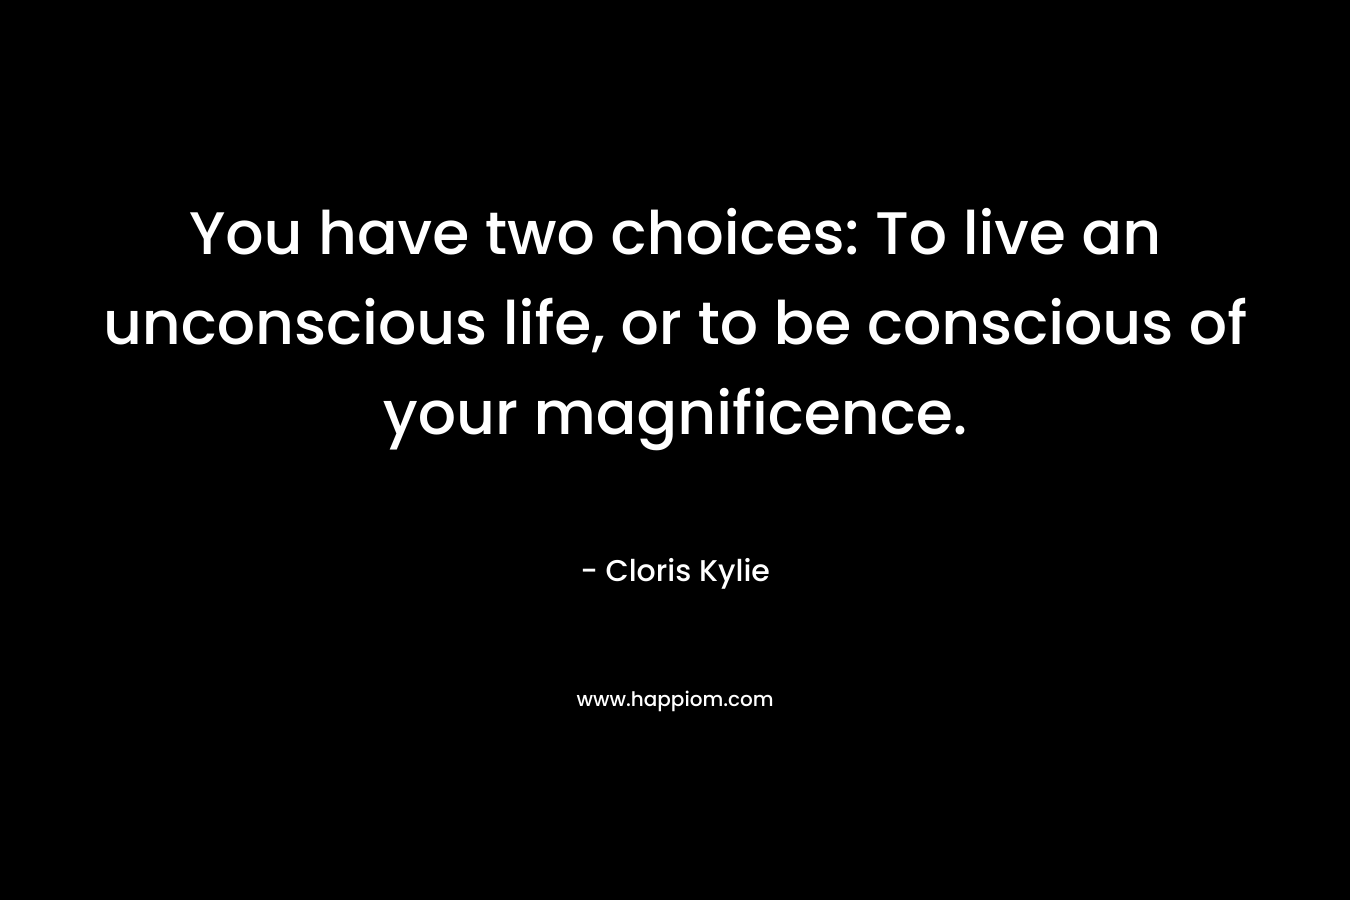 You have two choices: To live an unconscious life, or to be conscious of your magnificence. – Cloris Kylie